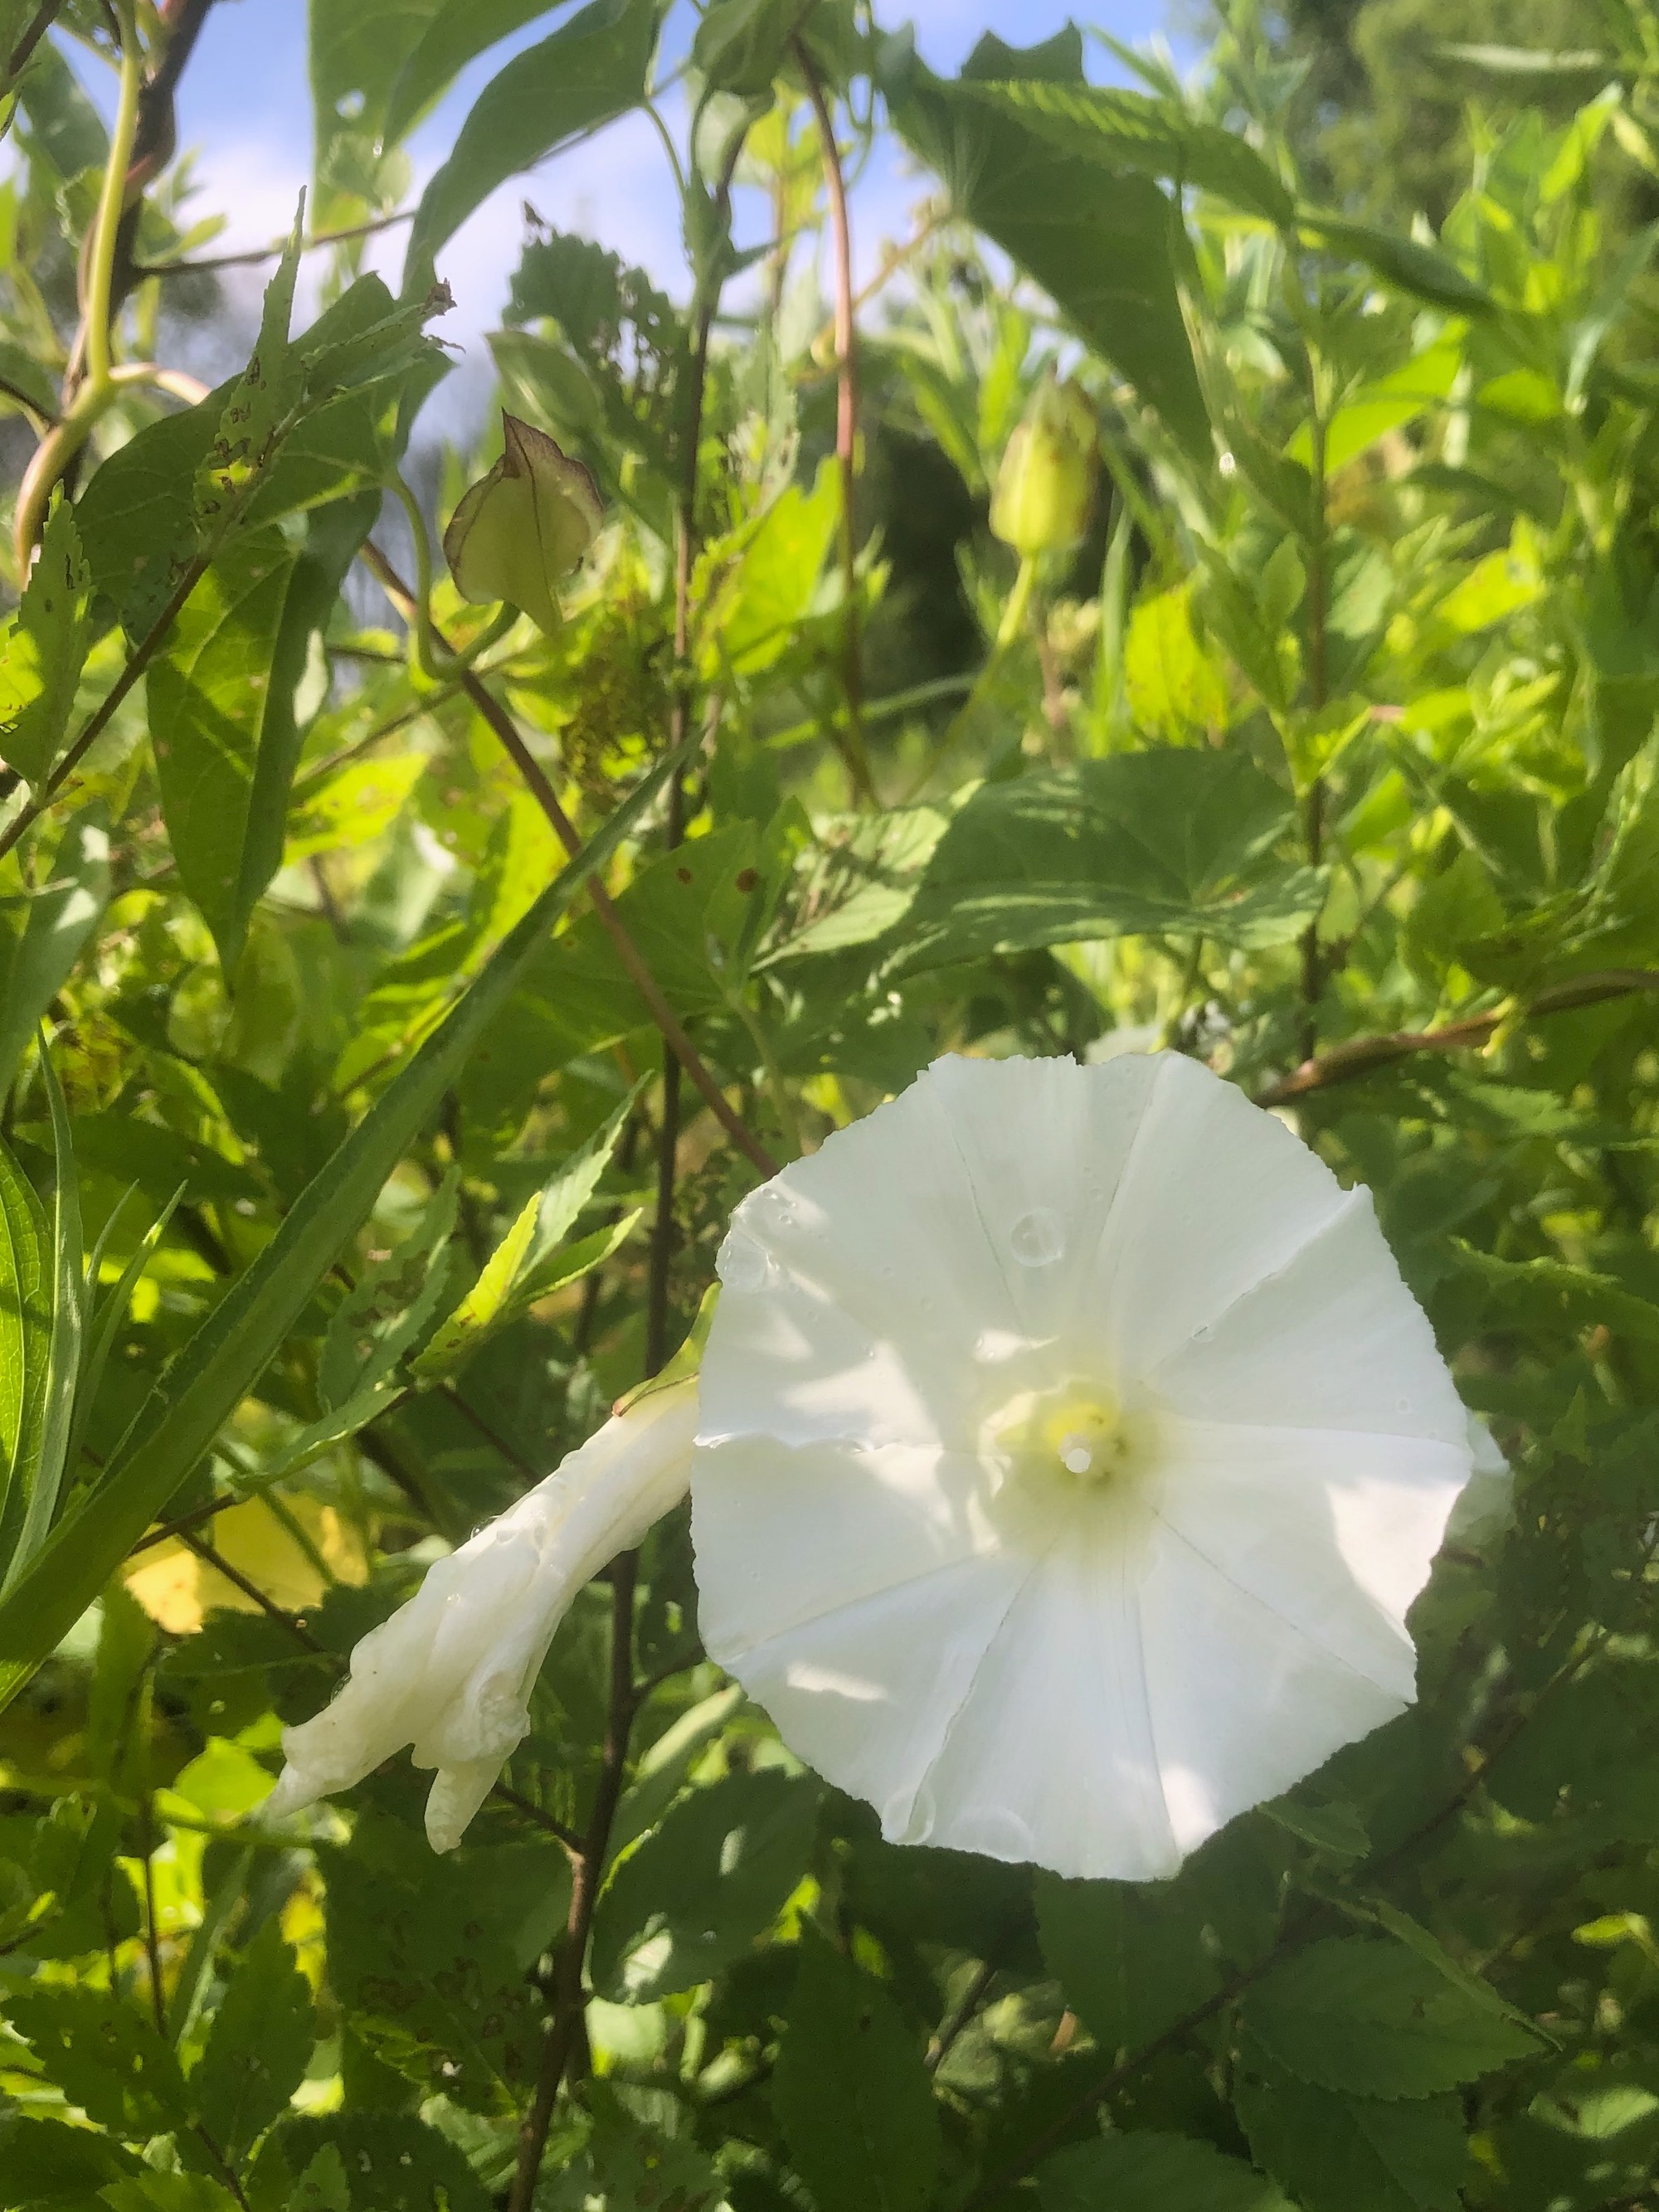 Hedge Bindweed on shore of Marion Dunn Pond in Madison, Wisconsin on July 10, 2020.